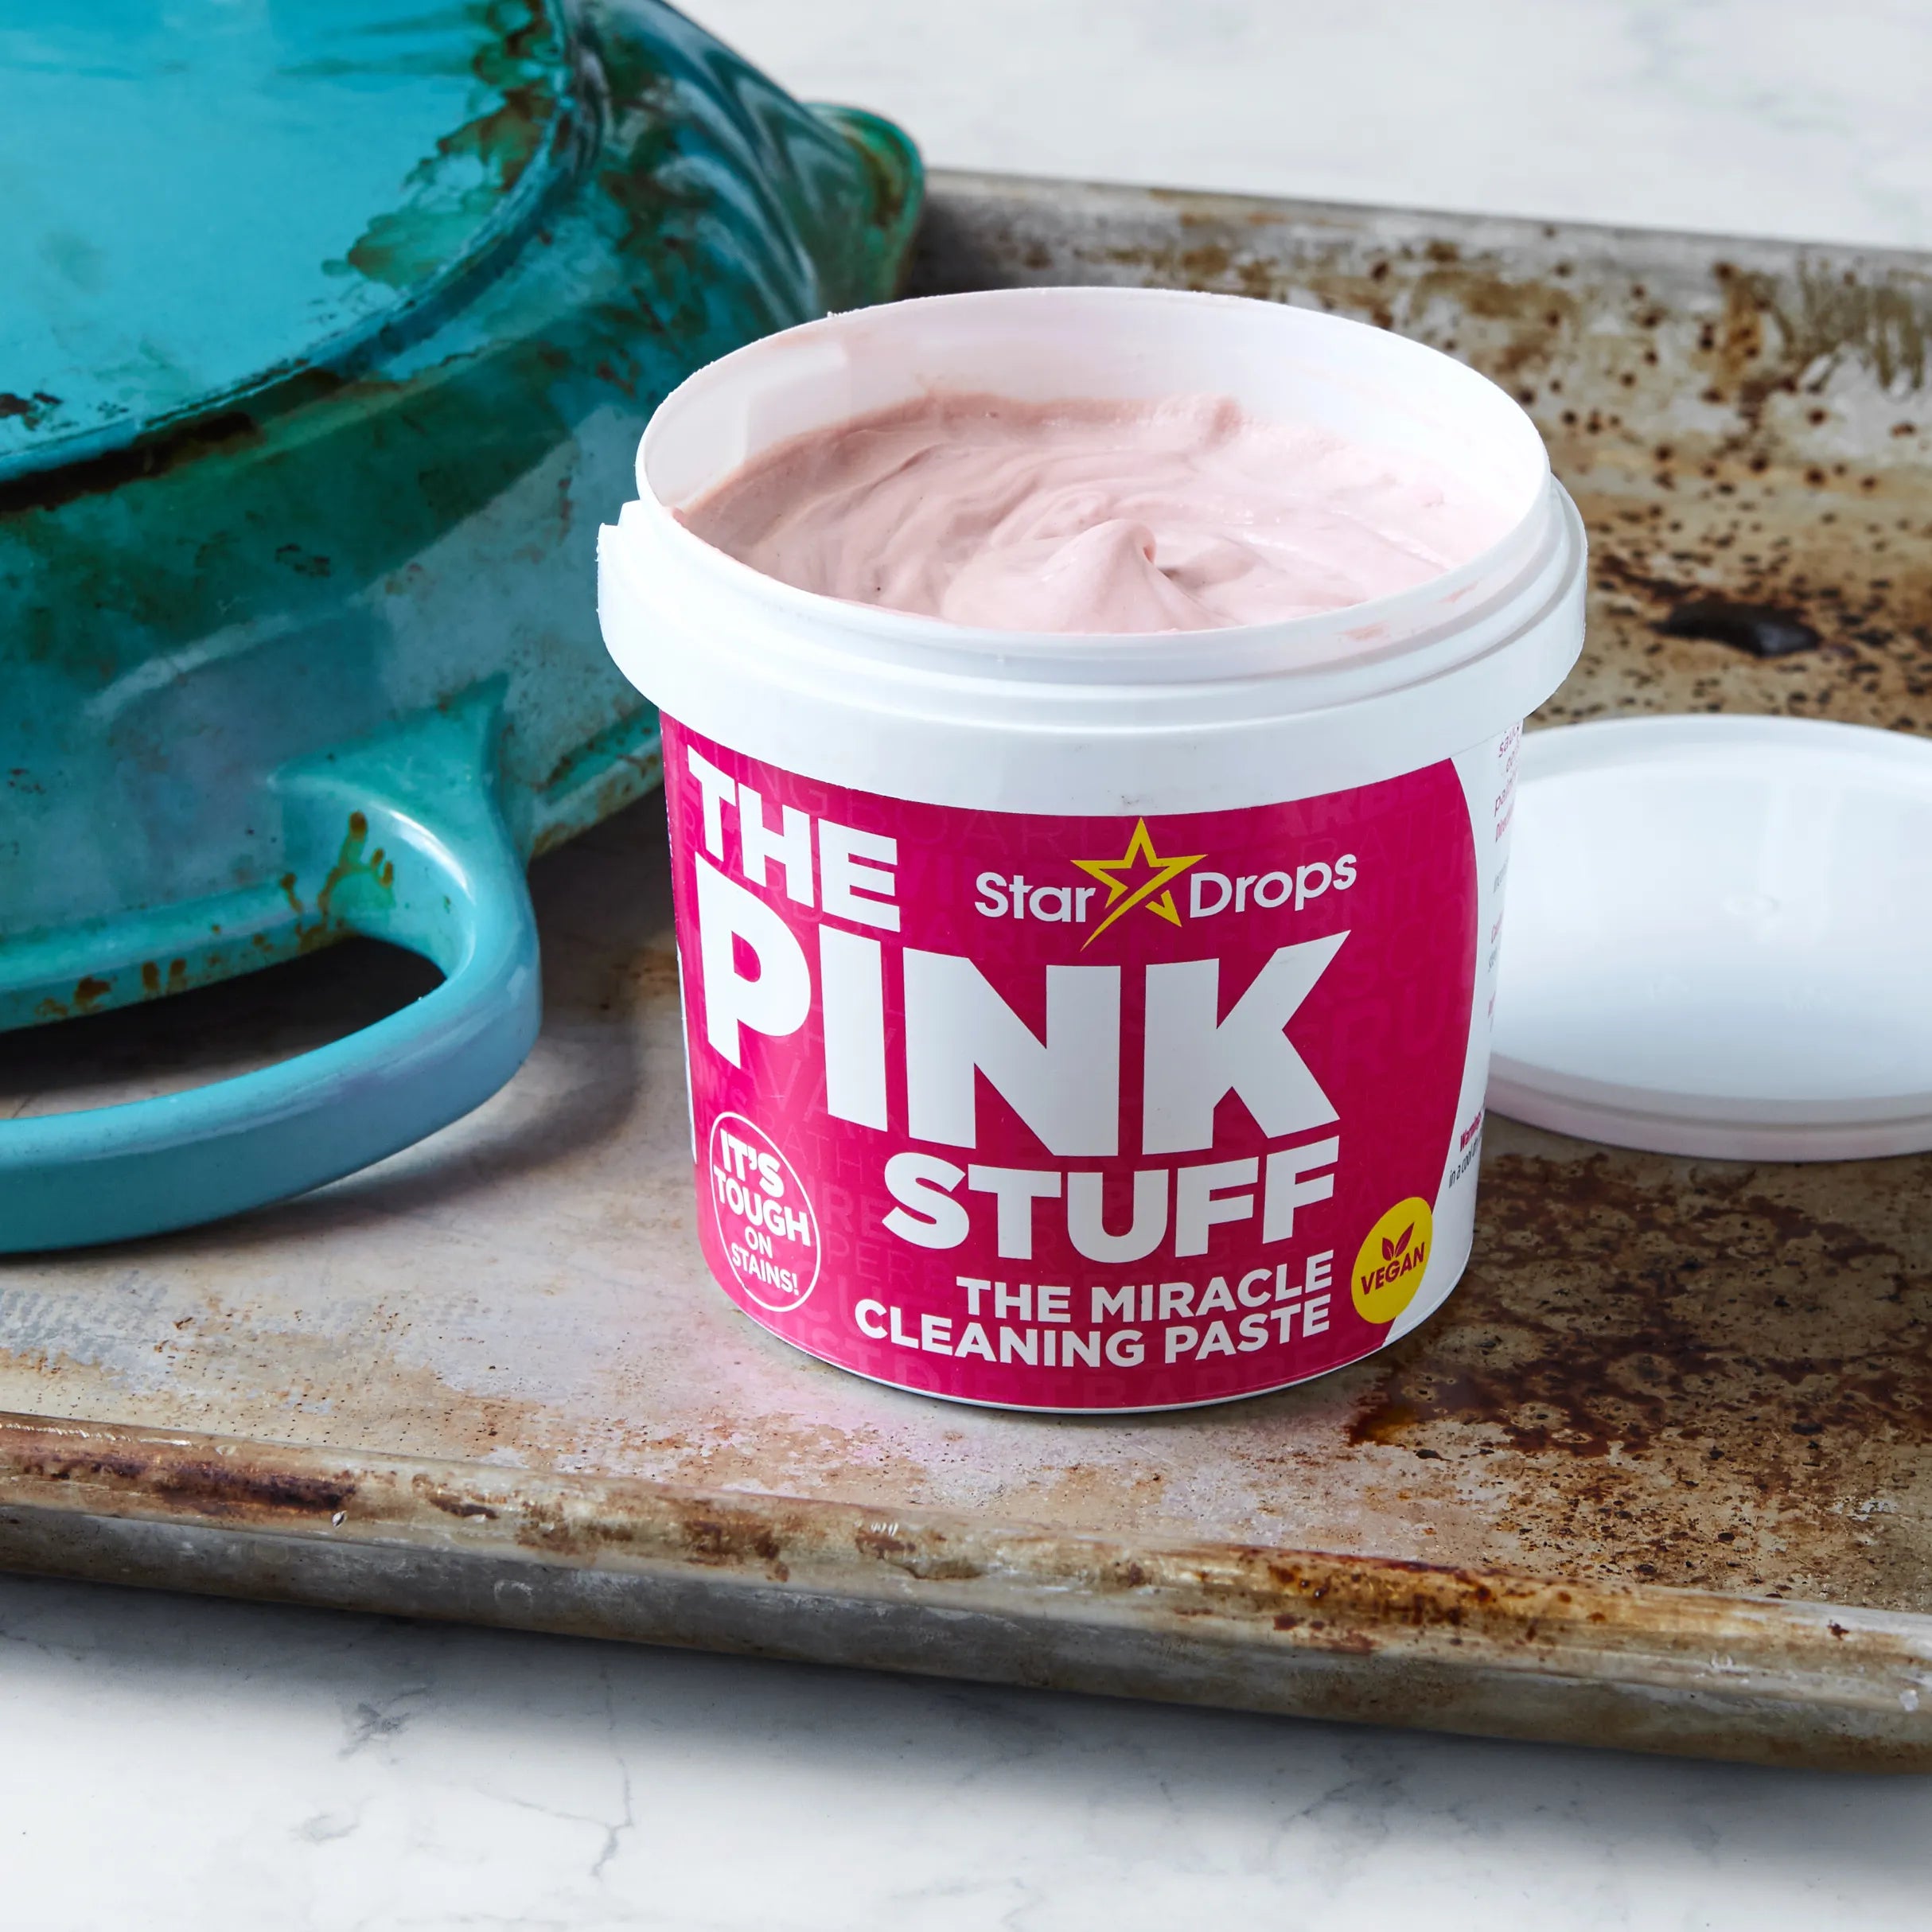  Stardrops The Pink Stuff Miracle Cleaning Paste 850g